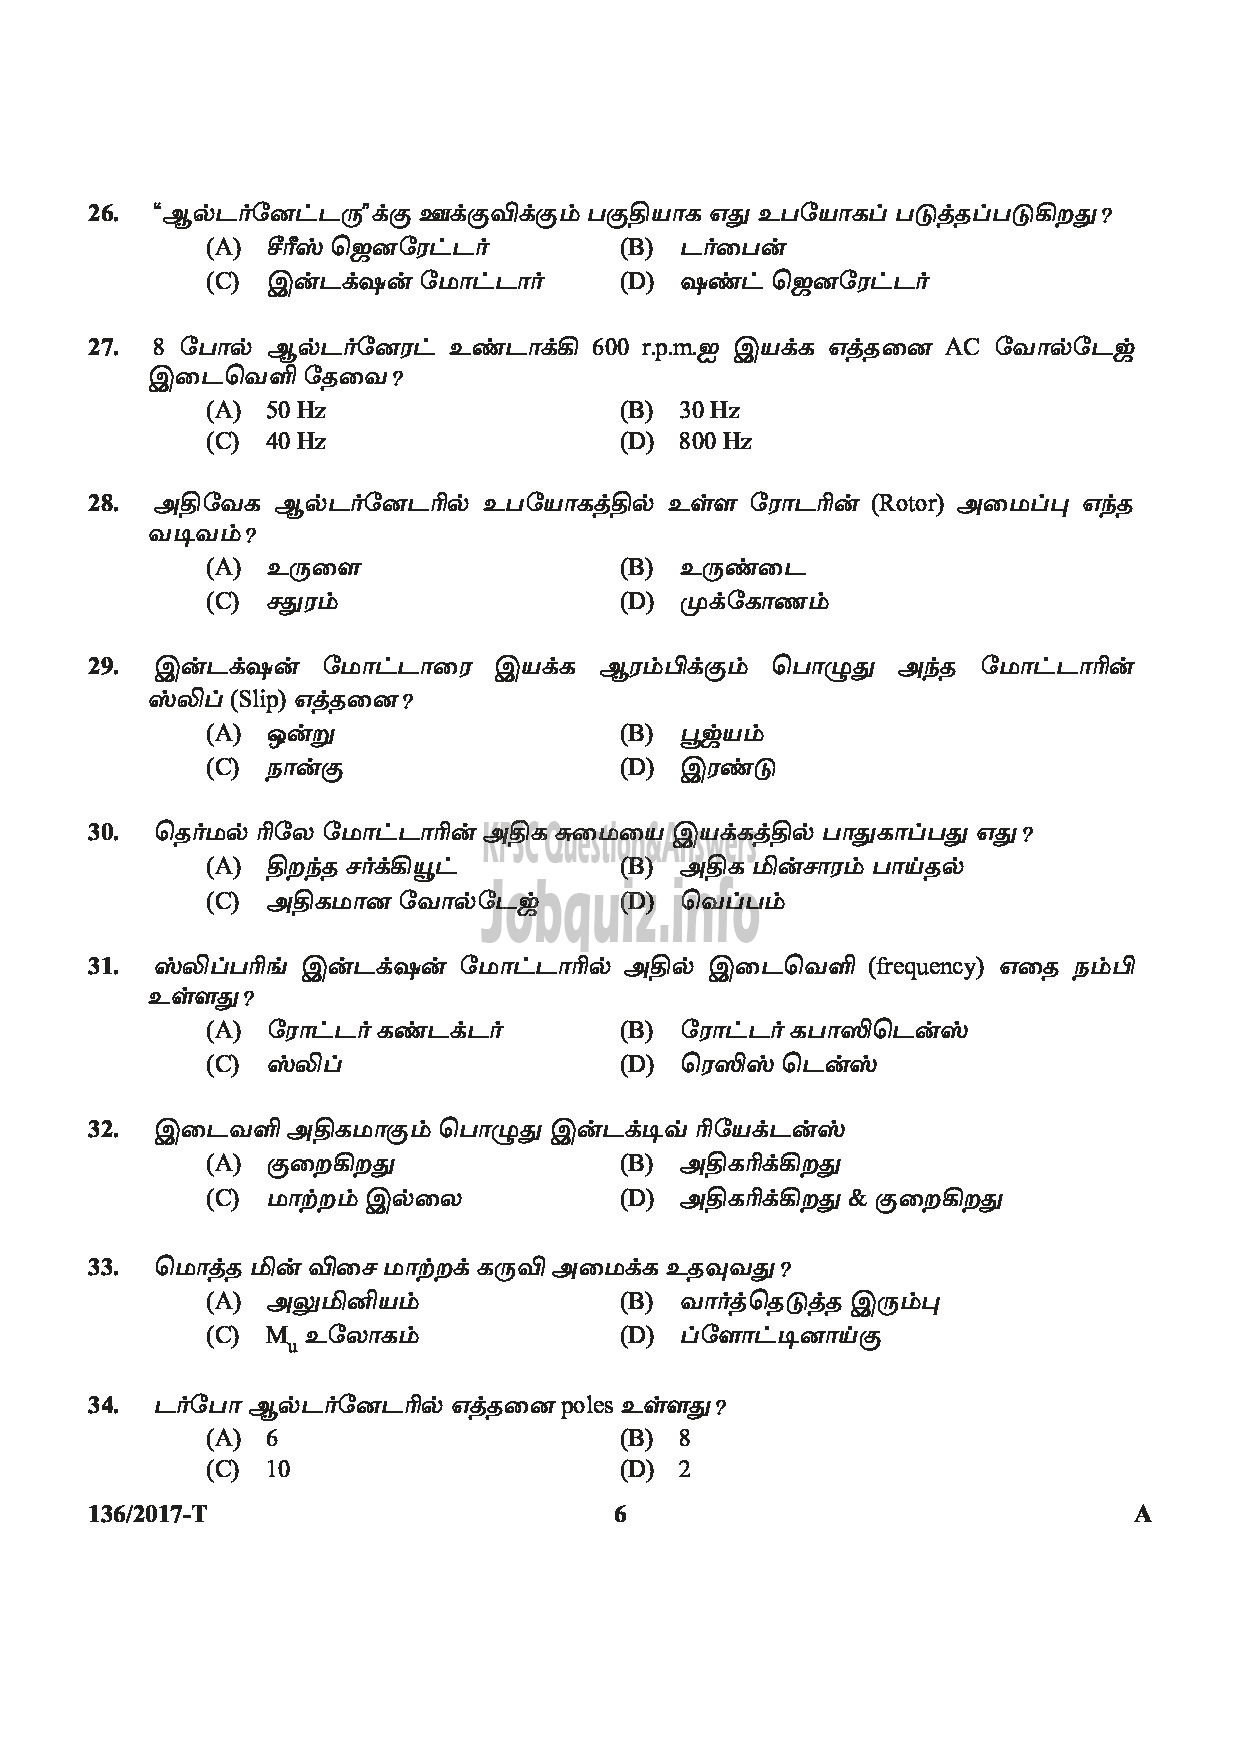 Kerala PSC Question Paper - METER READER/SPOT BILLER SPECIAL RECRUITMENT FROM AMONG ST ONLY MEDIUM OF QUESTION TAMIL-6